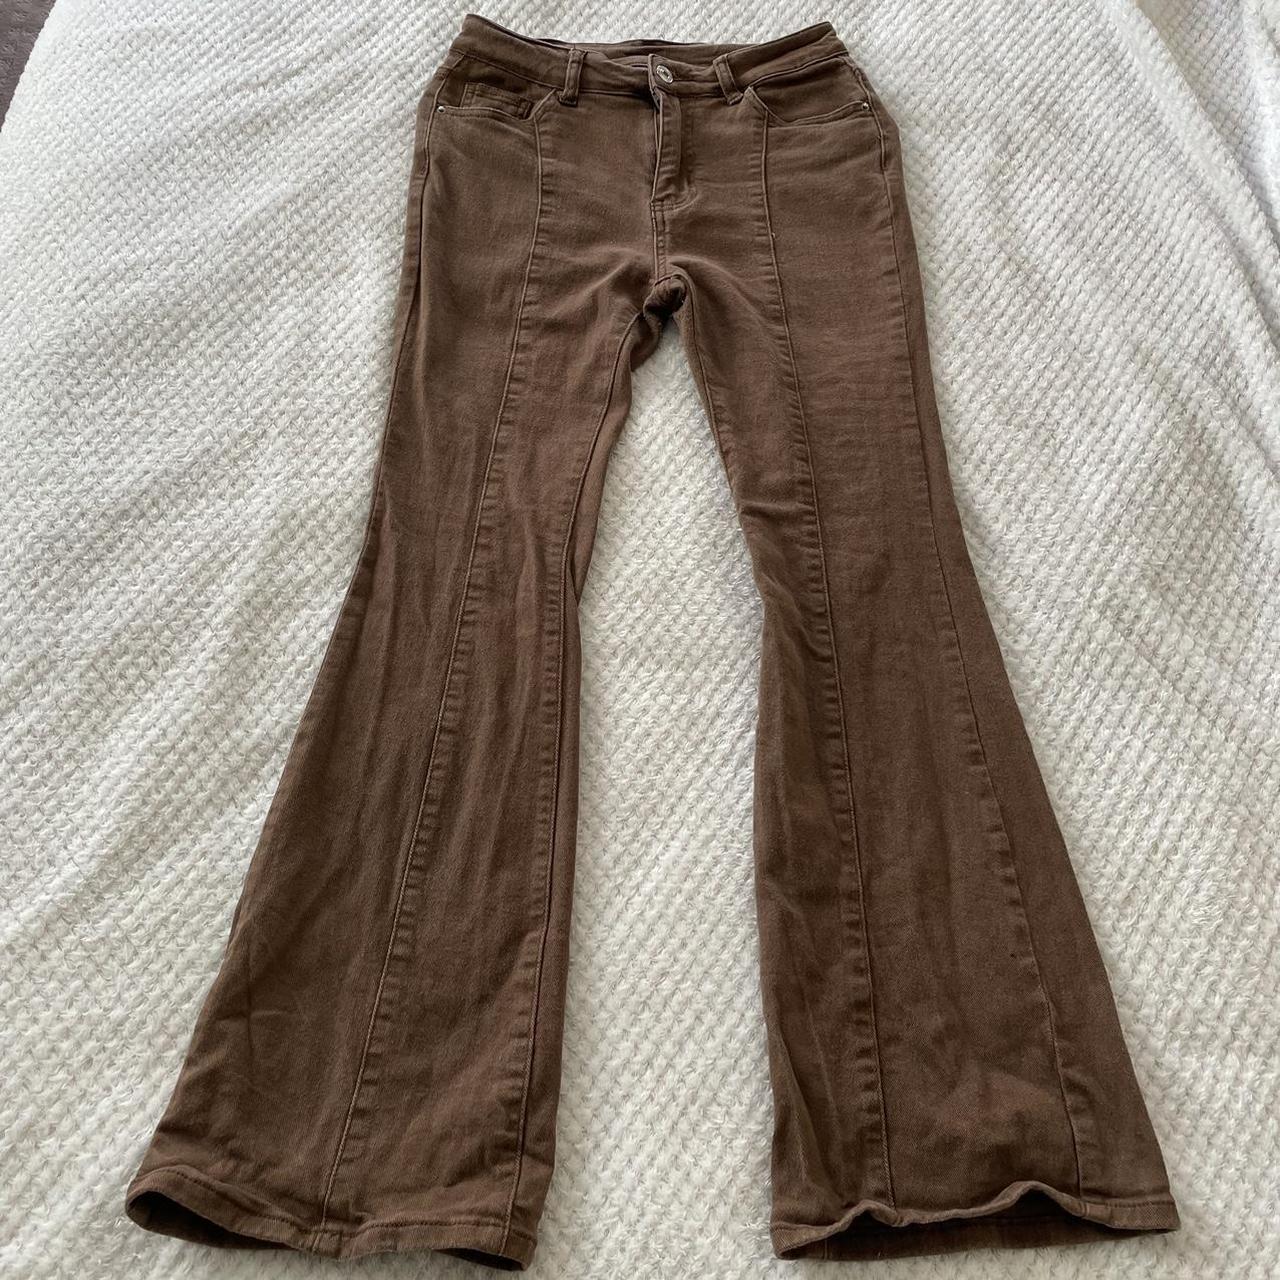 Shein Brown Bootcut Flare Jeans - Worn once with no... - Depop